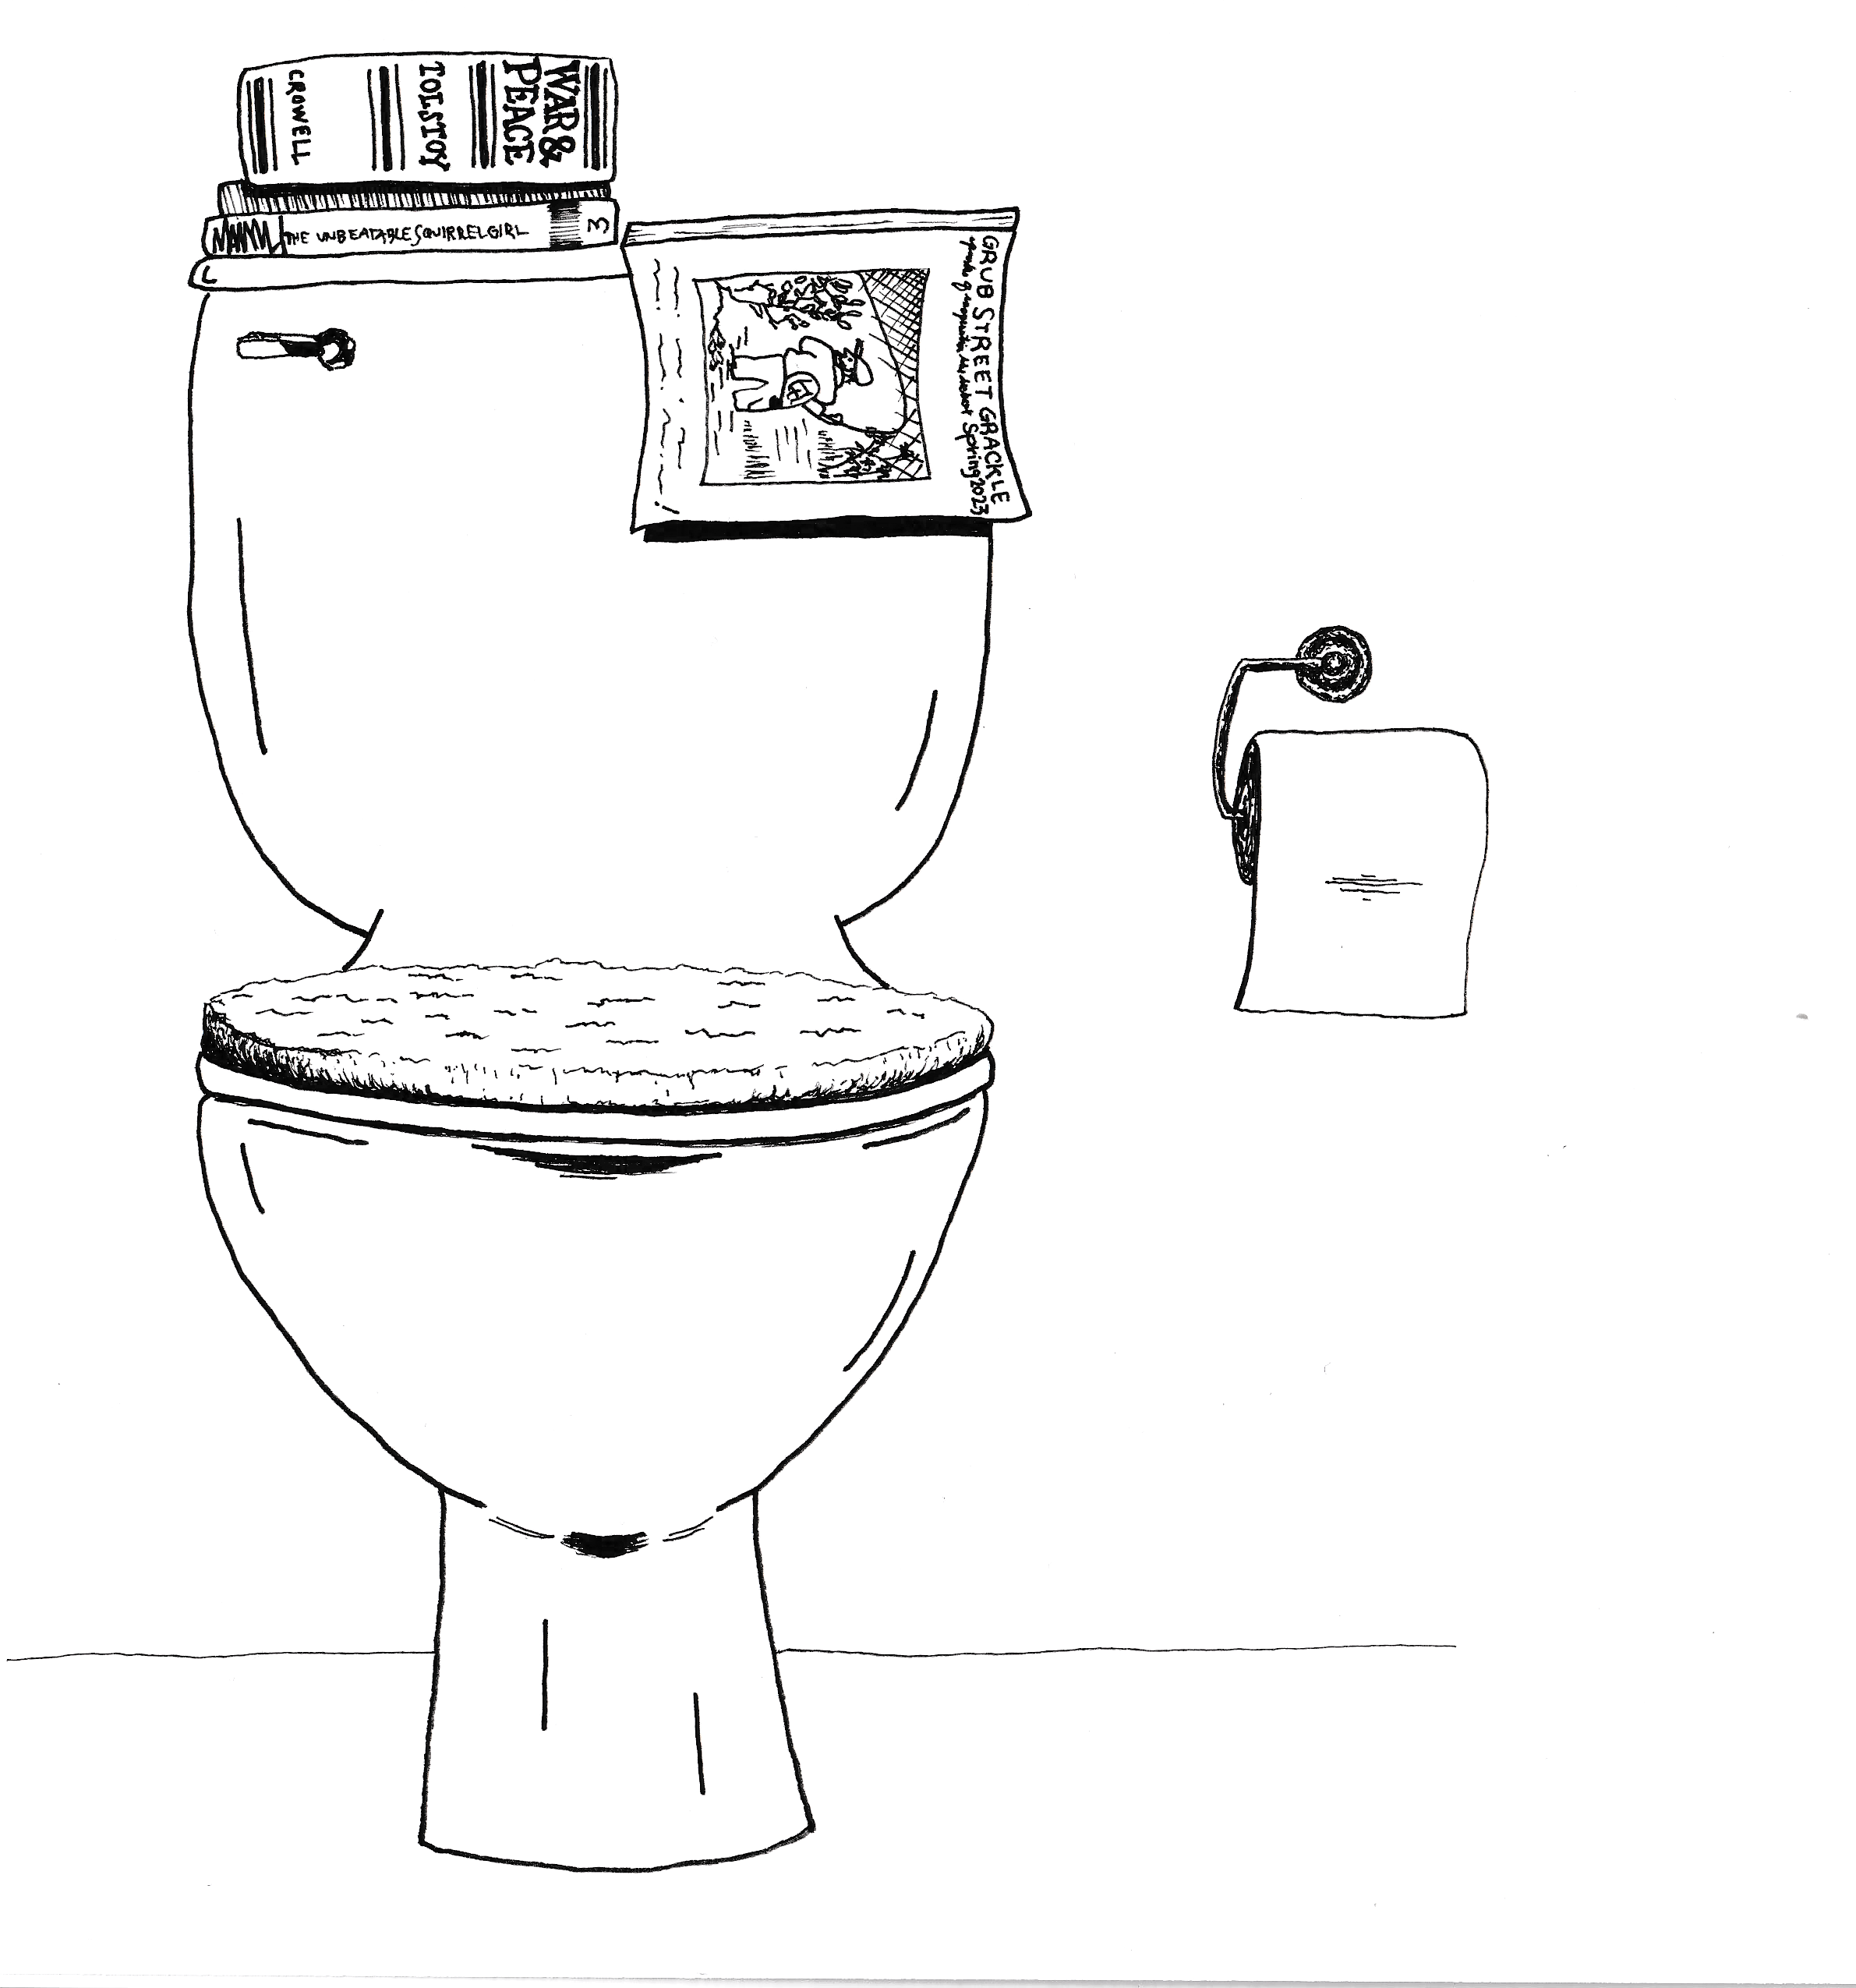 A copy of the Spring 2023 edition of Grub Street Grackle hangs open over the top of a toilet. Next to it lie three other volumes, one of which is distinctly Tolstoy's War and Peace. Beneath that is a volume of The Unbeatable Squirrel Girl. The toilet has a cozy-looking cover on it, so it is a comfortable place for people who are not actually using the toilet for its intended purpose, but to hide from everyone and just read the Grackle.